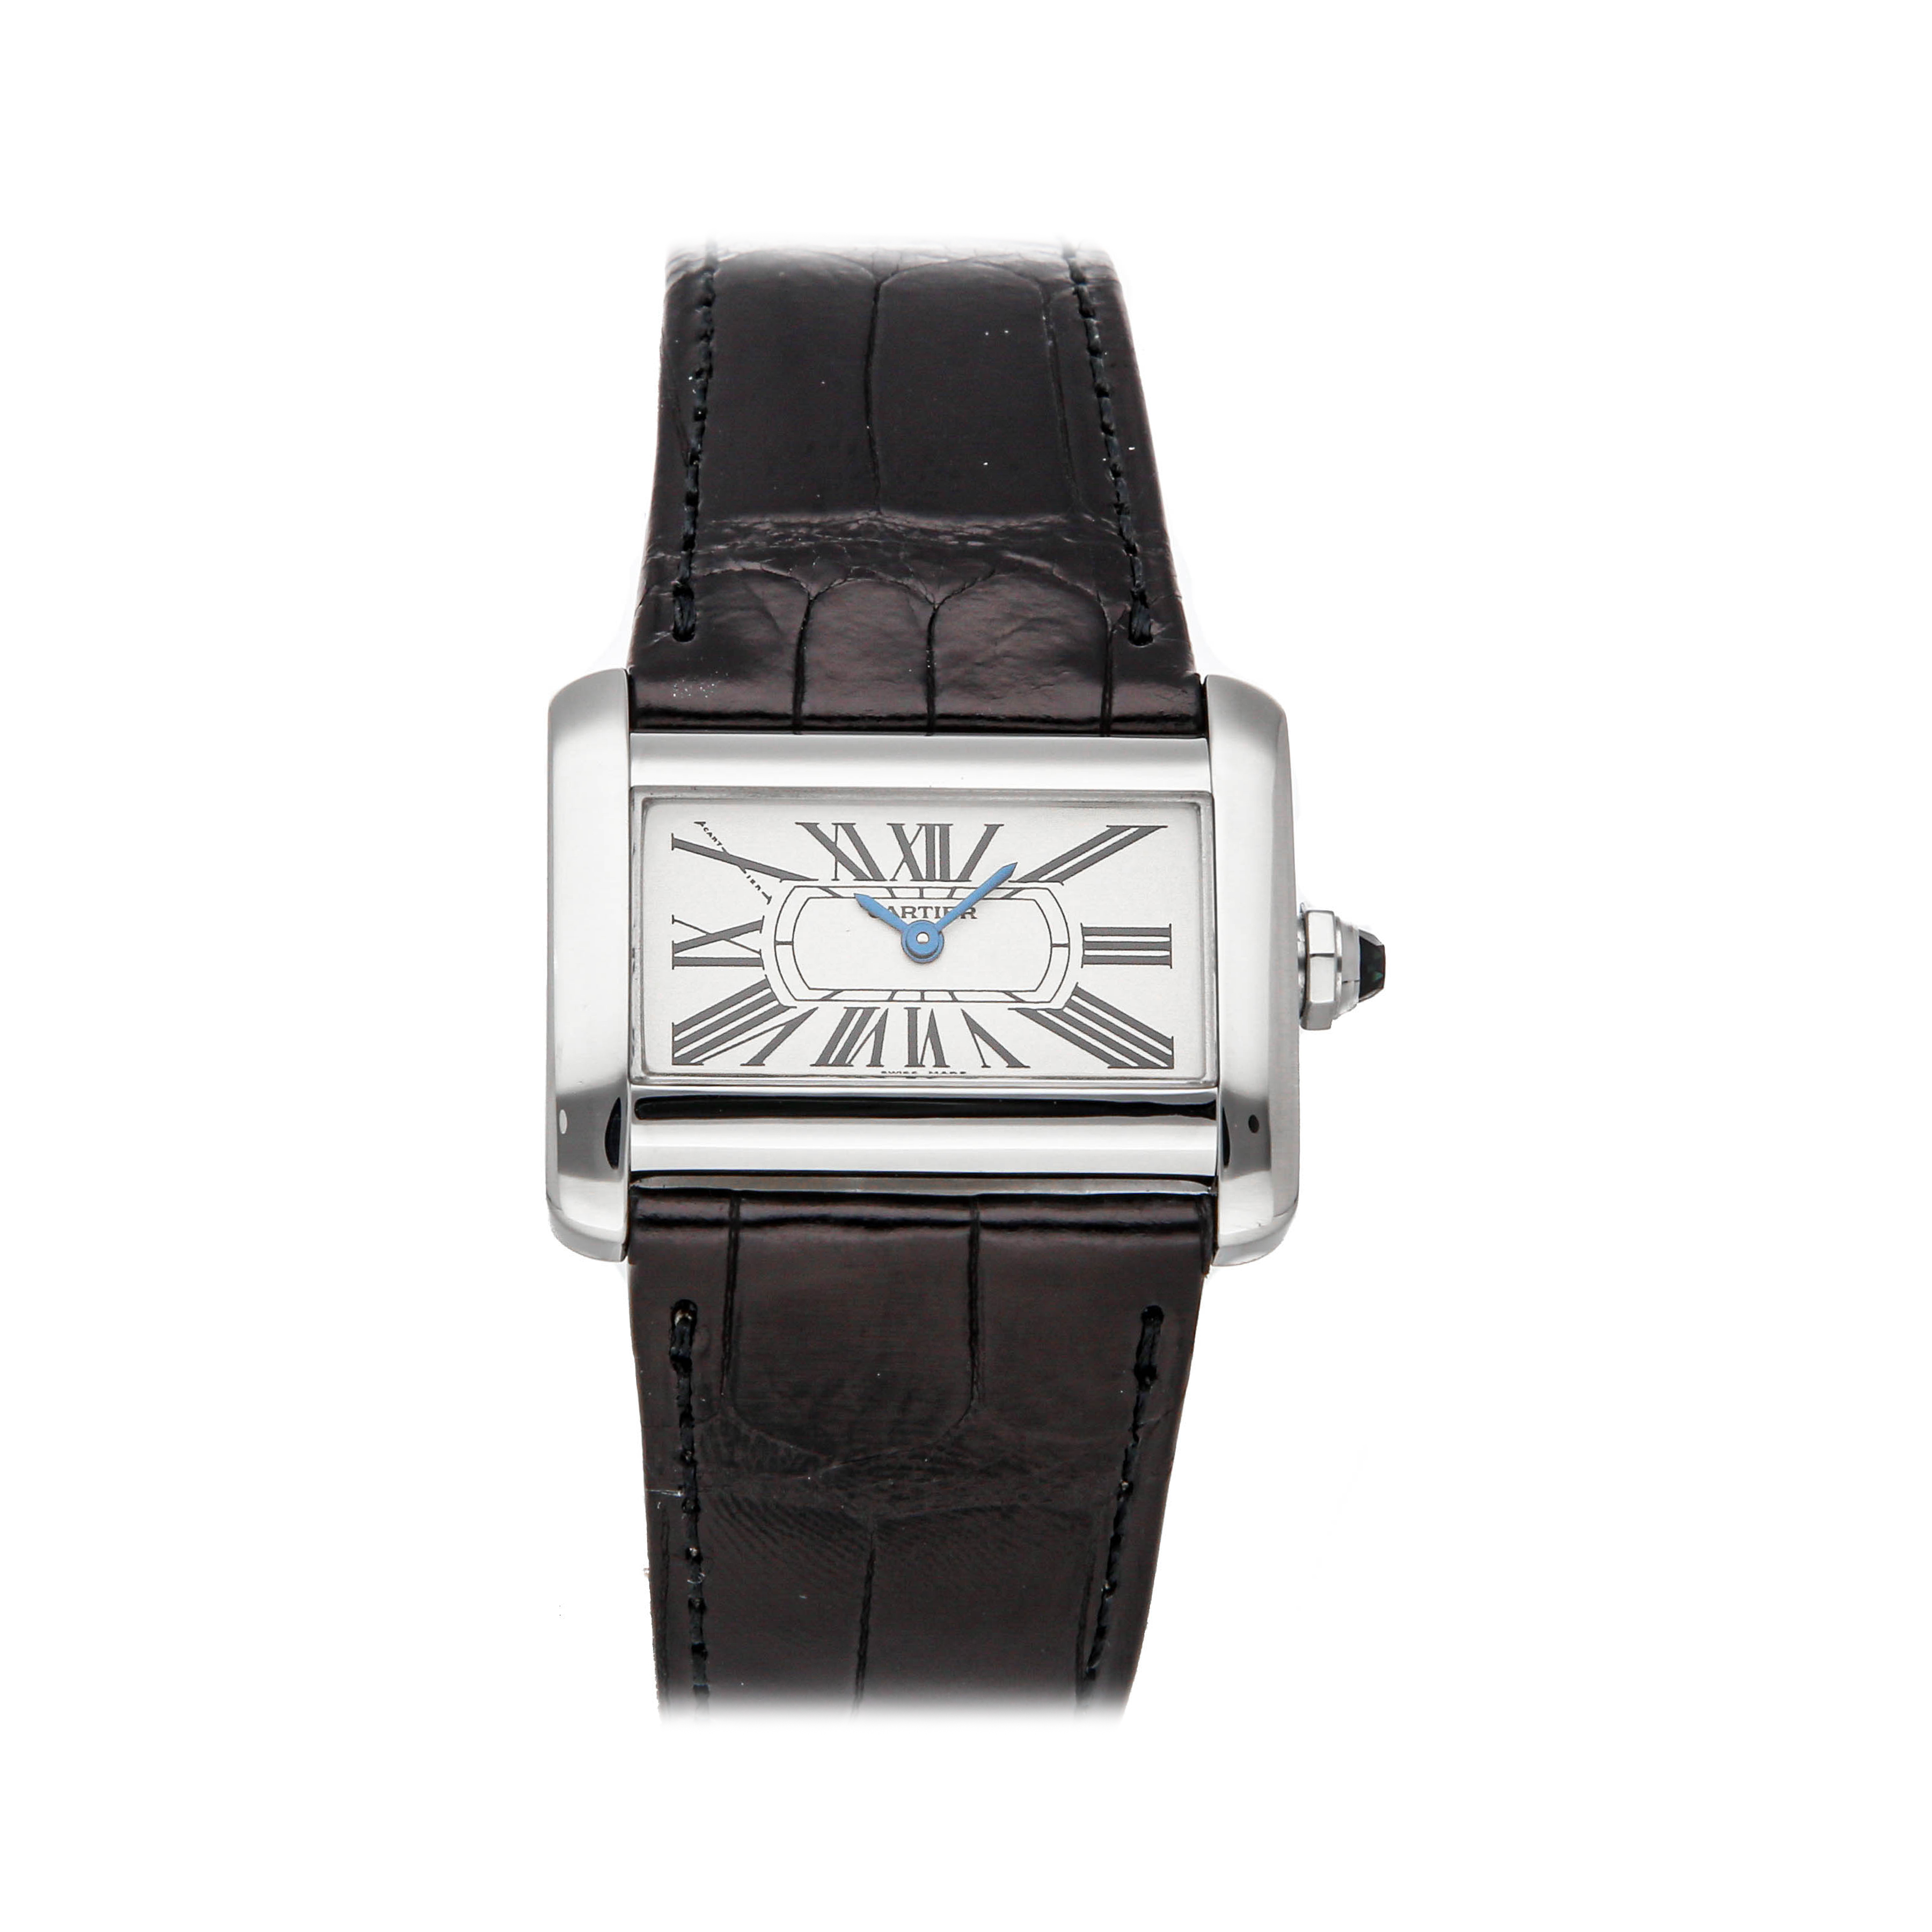 Certified Pre-Owned Cartier Watches for 